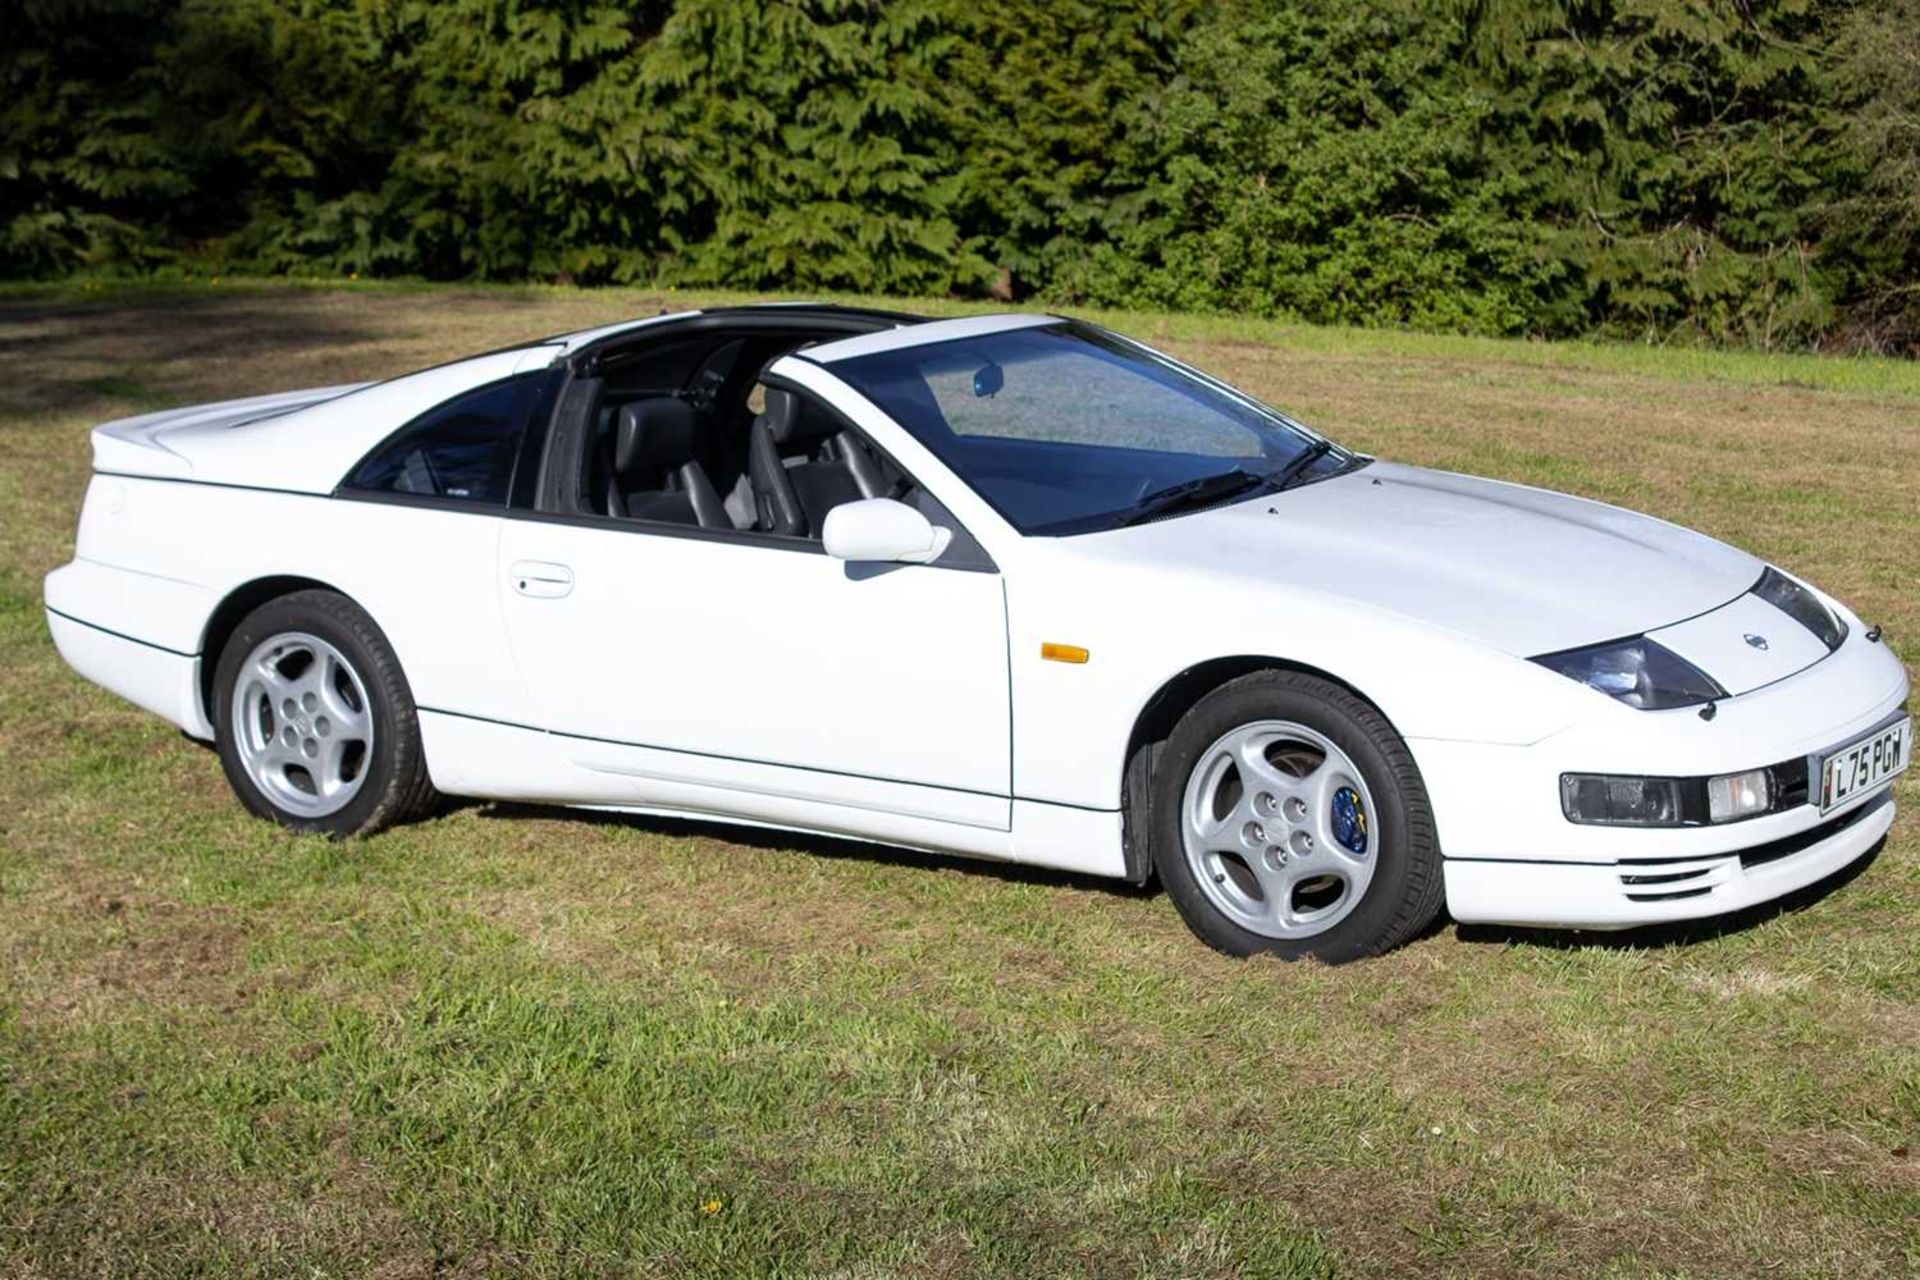 1990 Nissan 300ZX Turbo 2+2 Targa One of the last examples registered in the UK - Image 16 of 89